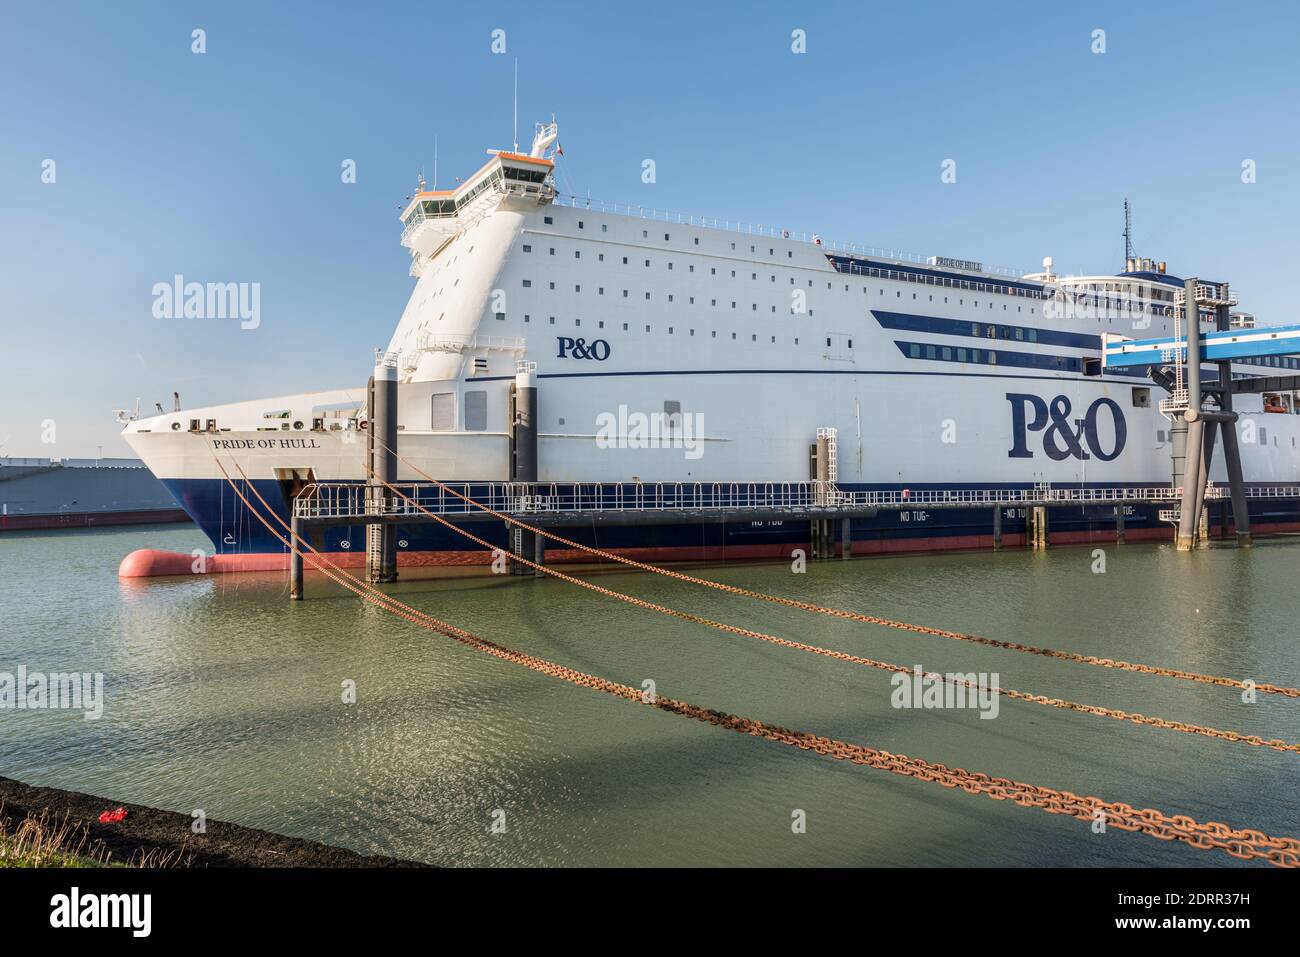 ROTTERDAM EUROPOORT, THE NETHERLANDS - FEBRUARY 29, 2016: The ferry Pride of Hull of P&O North Sea Ferries is chained at the quay in Rotterdam Europoo Stock Photo